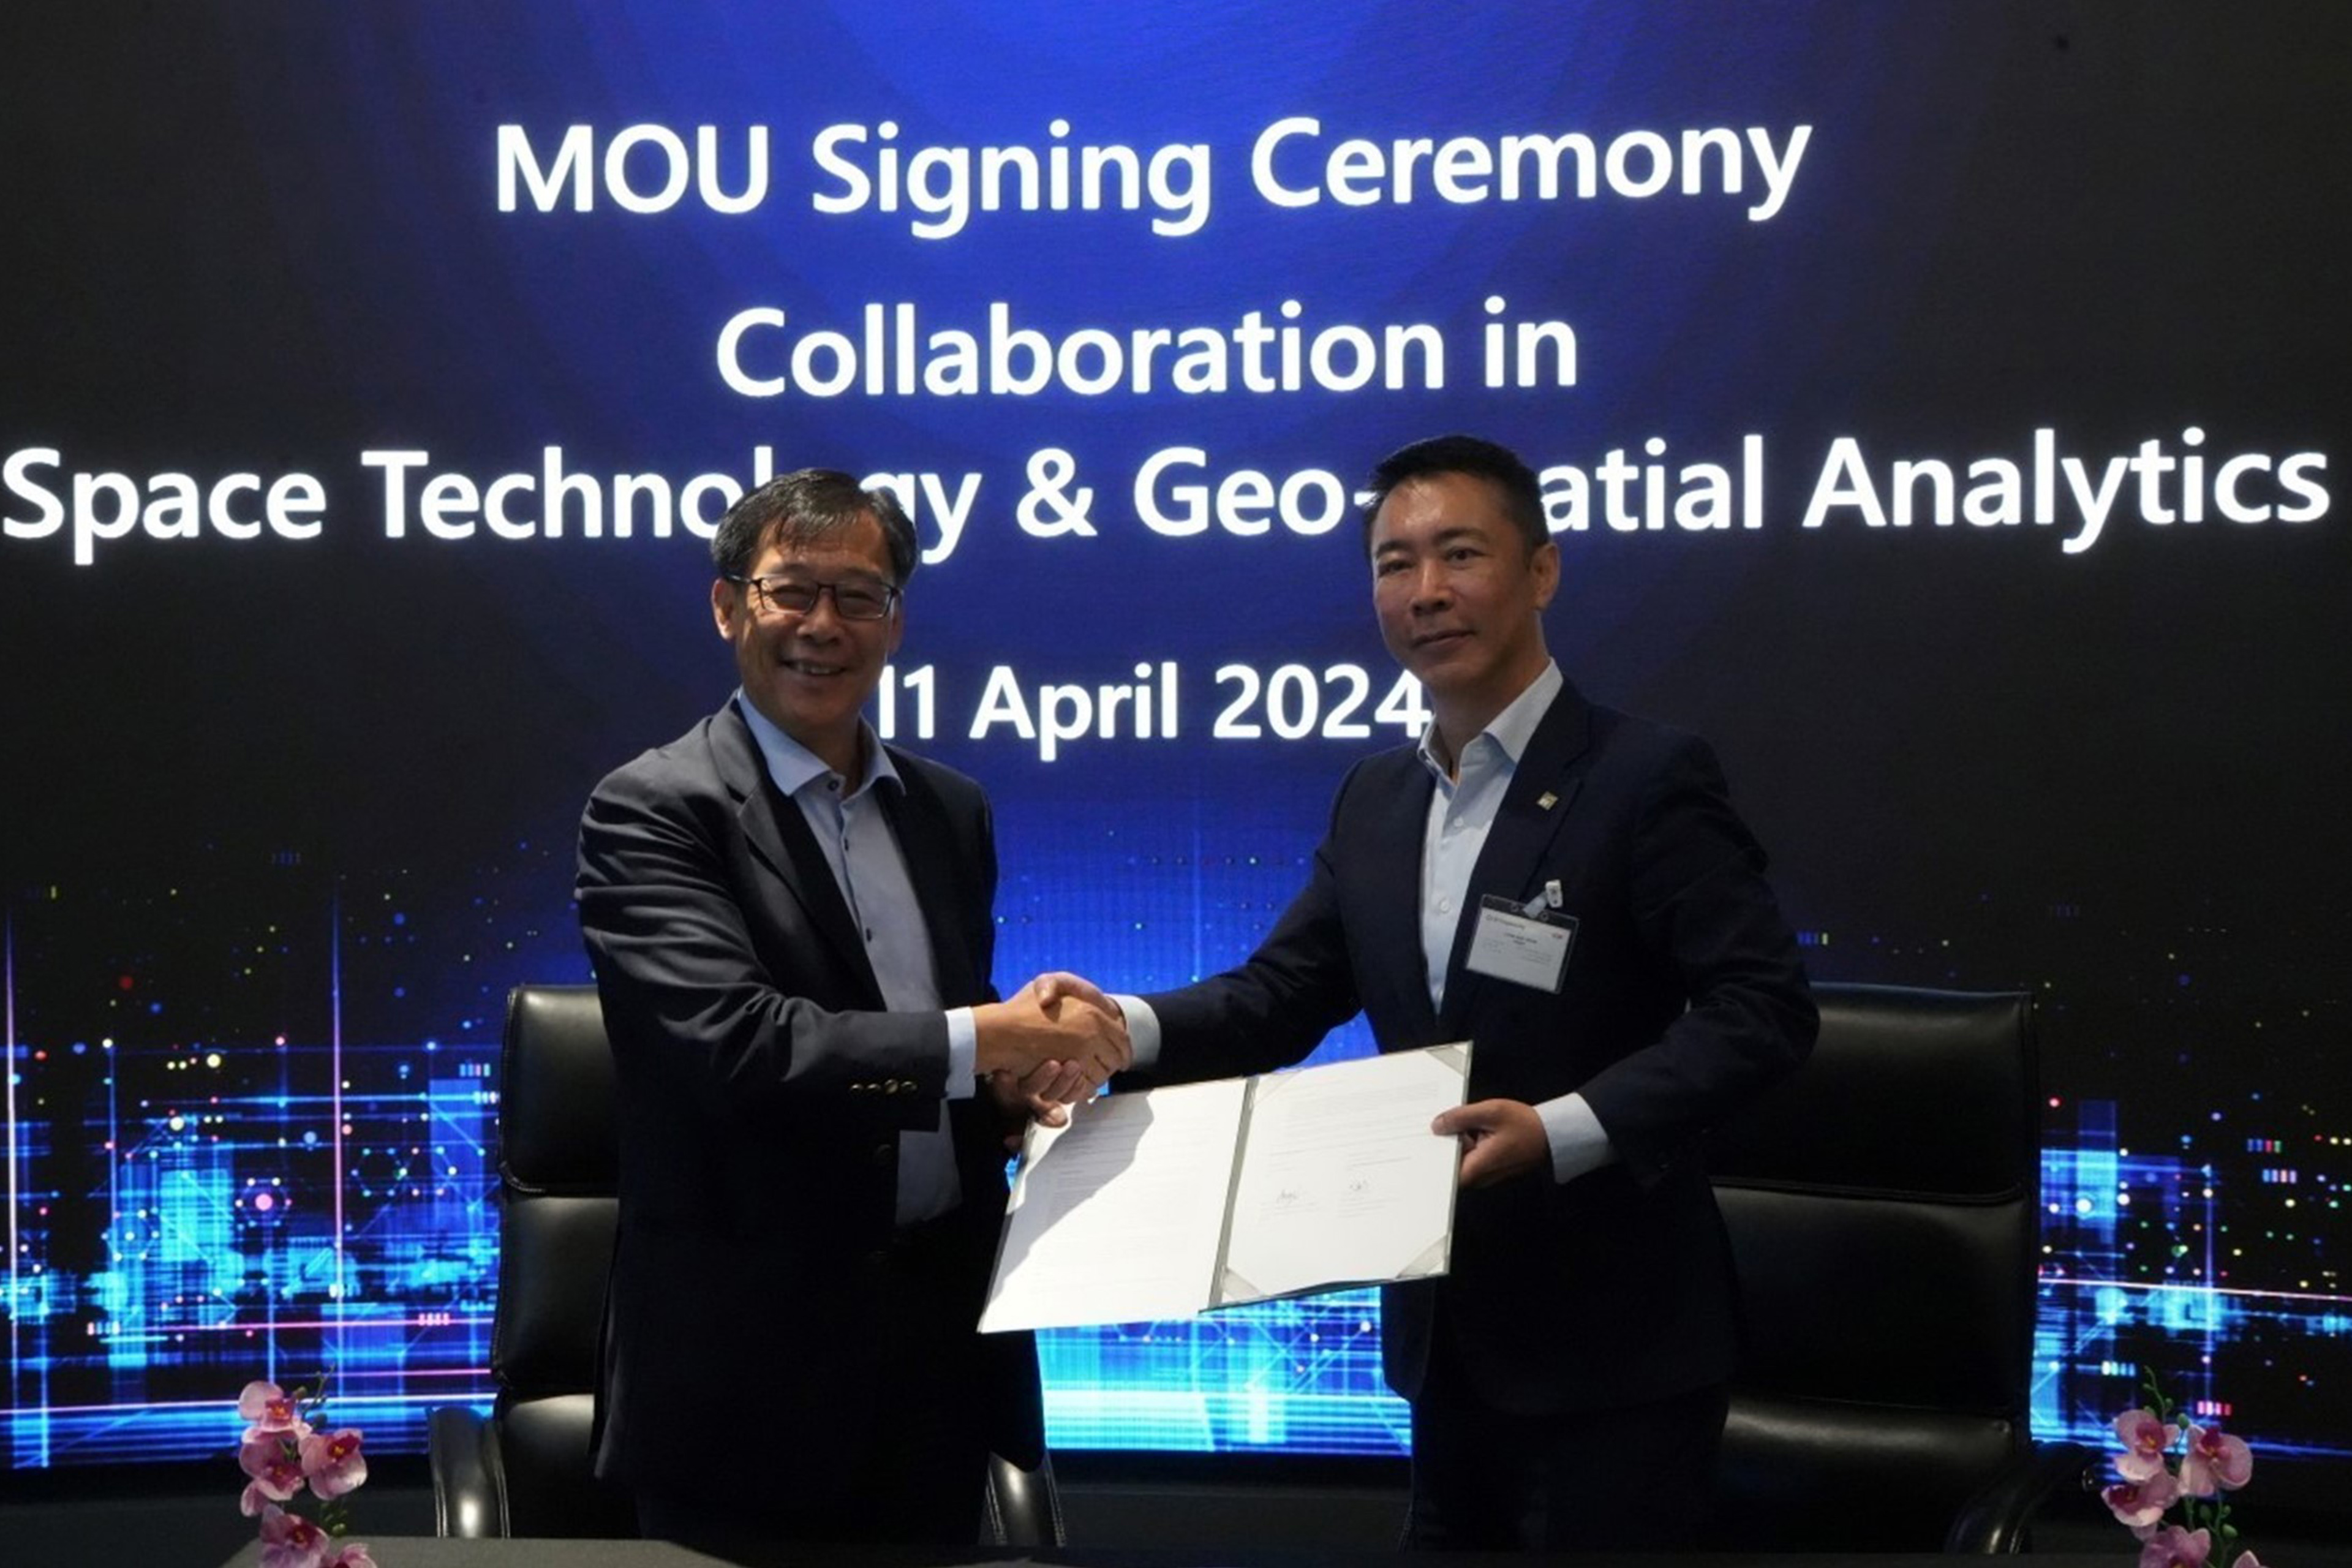 Signing the MOU are Mr. Low Jin Phang, President, Digital Systems of ST Engineering (left) and Mr. Liew Nam Soon, EY Asean and Singapore Regional Managing Partner (right).